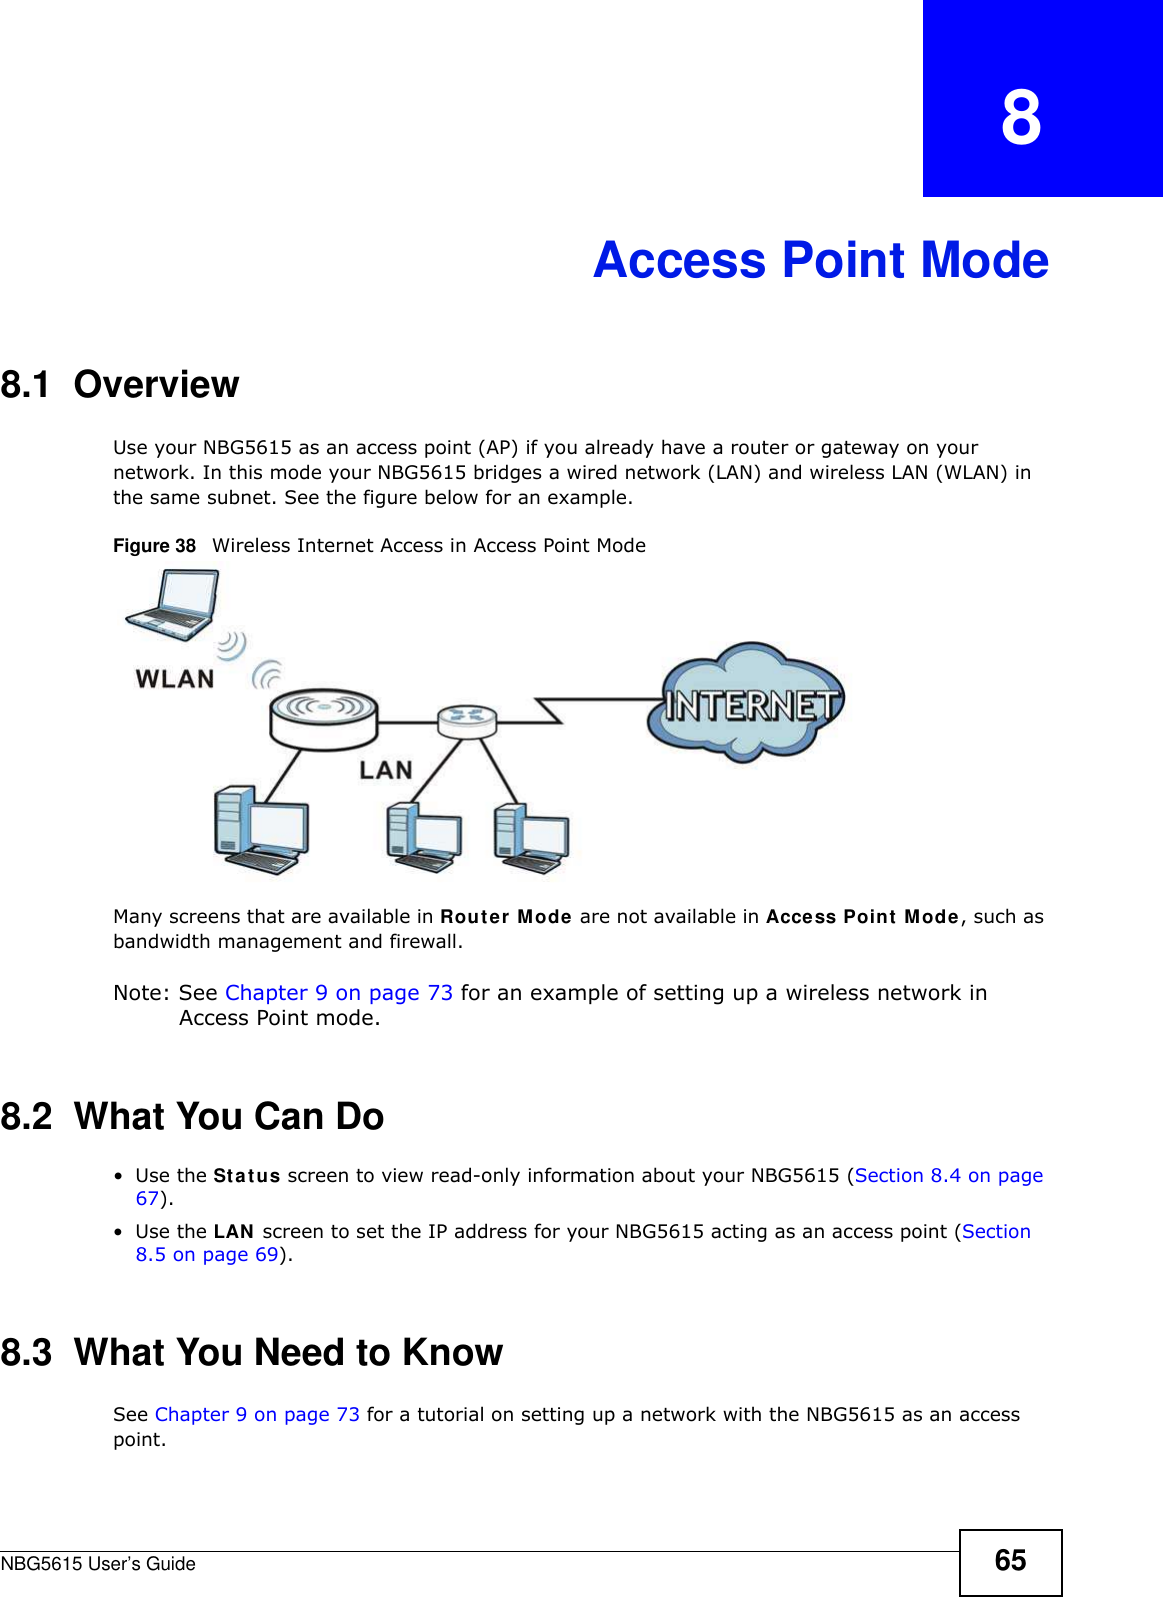 NBG5615 User’s Guide 65CHAPTER   8Access Point Mode8.1  OverviewUse your NBG5615 as an access point (AP) if you already have a router or gateway on your network. In this mode your NBG5615 bridges a wired network (LAN) and wireless LAN (WLAN) in the same subnet. See the figure below for an example.Figure 38   Wireless Internet Access in Access Point Mode Many screens that are available in Router Mode are not available in Access Point Mode, such as bandwidth management and firewall.Note: See Chapter 9 on page 73 for an example of setting up a wireless network in Access Point mode. 8.2  What You Can Do•Use the Status screen to view read-only information about your NBG5615 (Section 8.4 on page 67).•Use the LAN screen to set the IP address for your NBG5615 acting as an access point (Section 8.5 on page 69).8.3  What You Need to KnowSee Chapter 9 on page 73 for a tutorial on setting up a network with the NBG5615 as an access point.